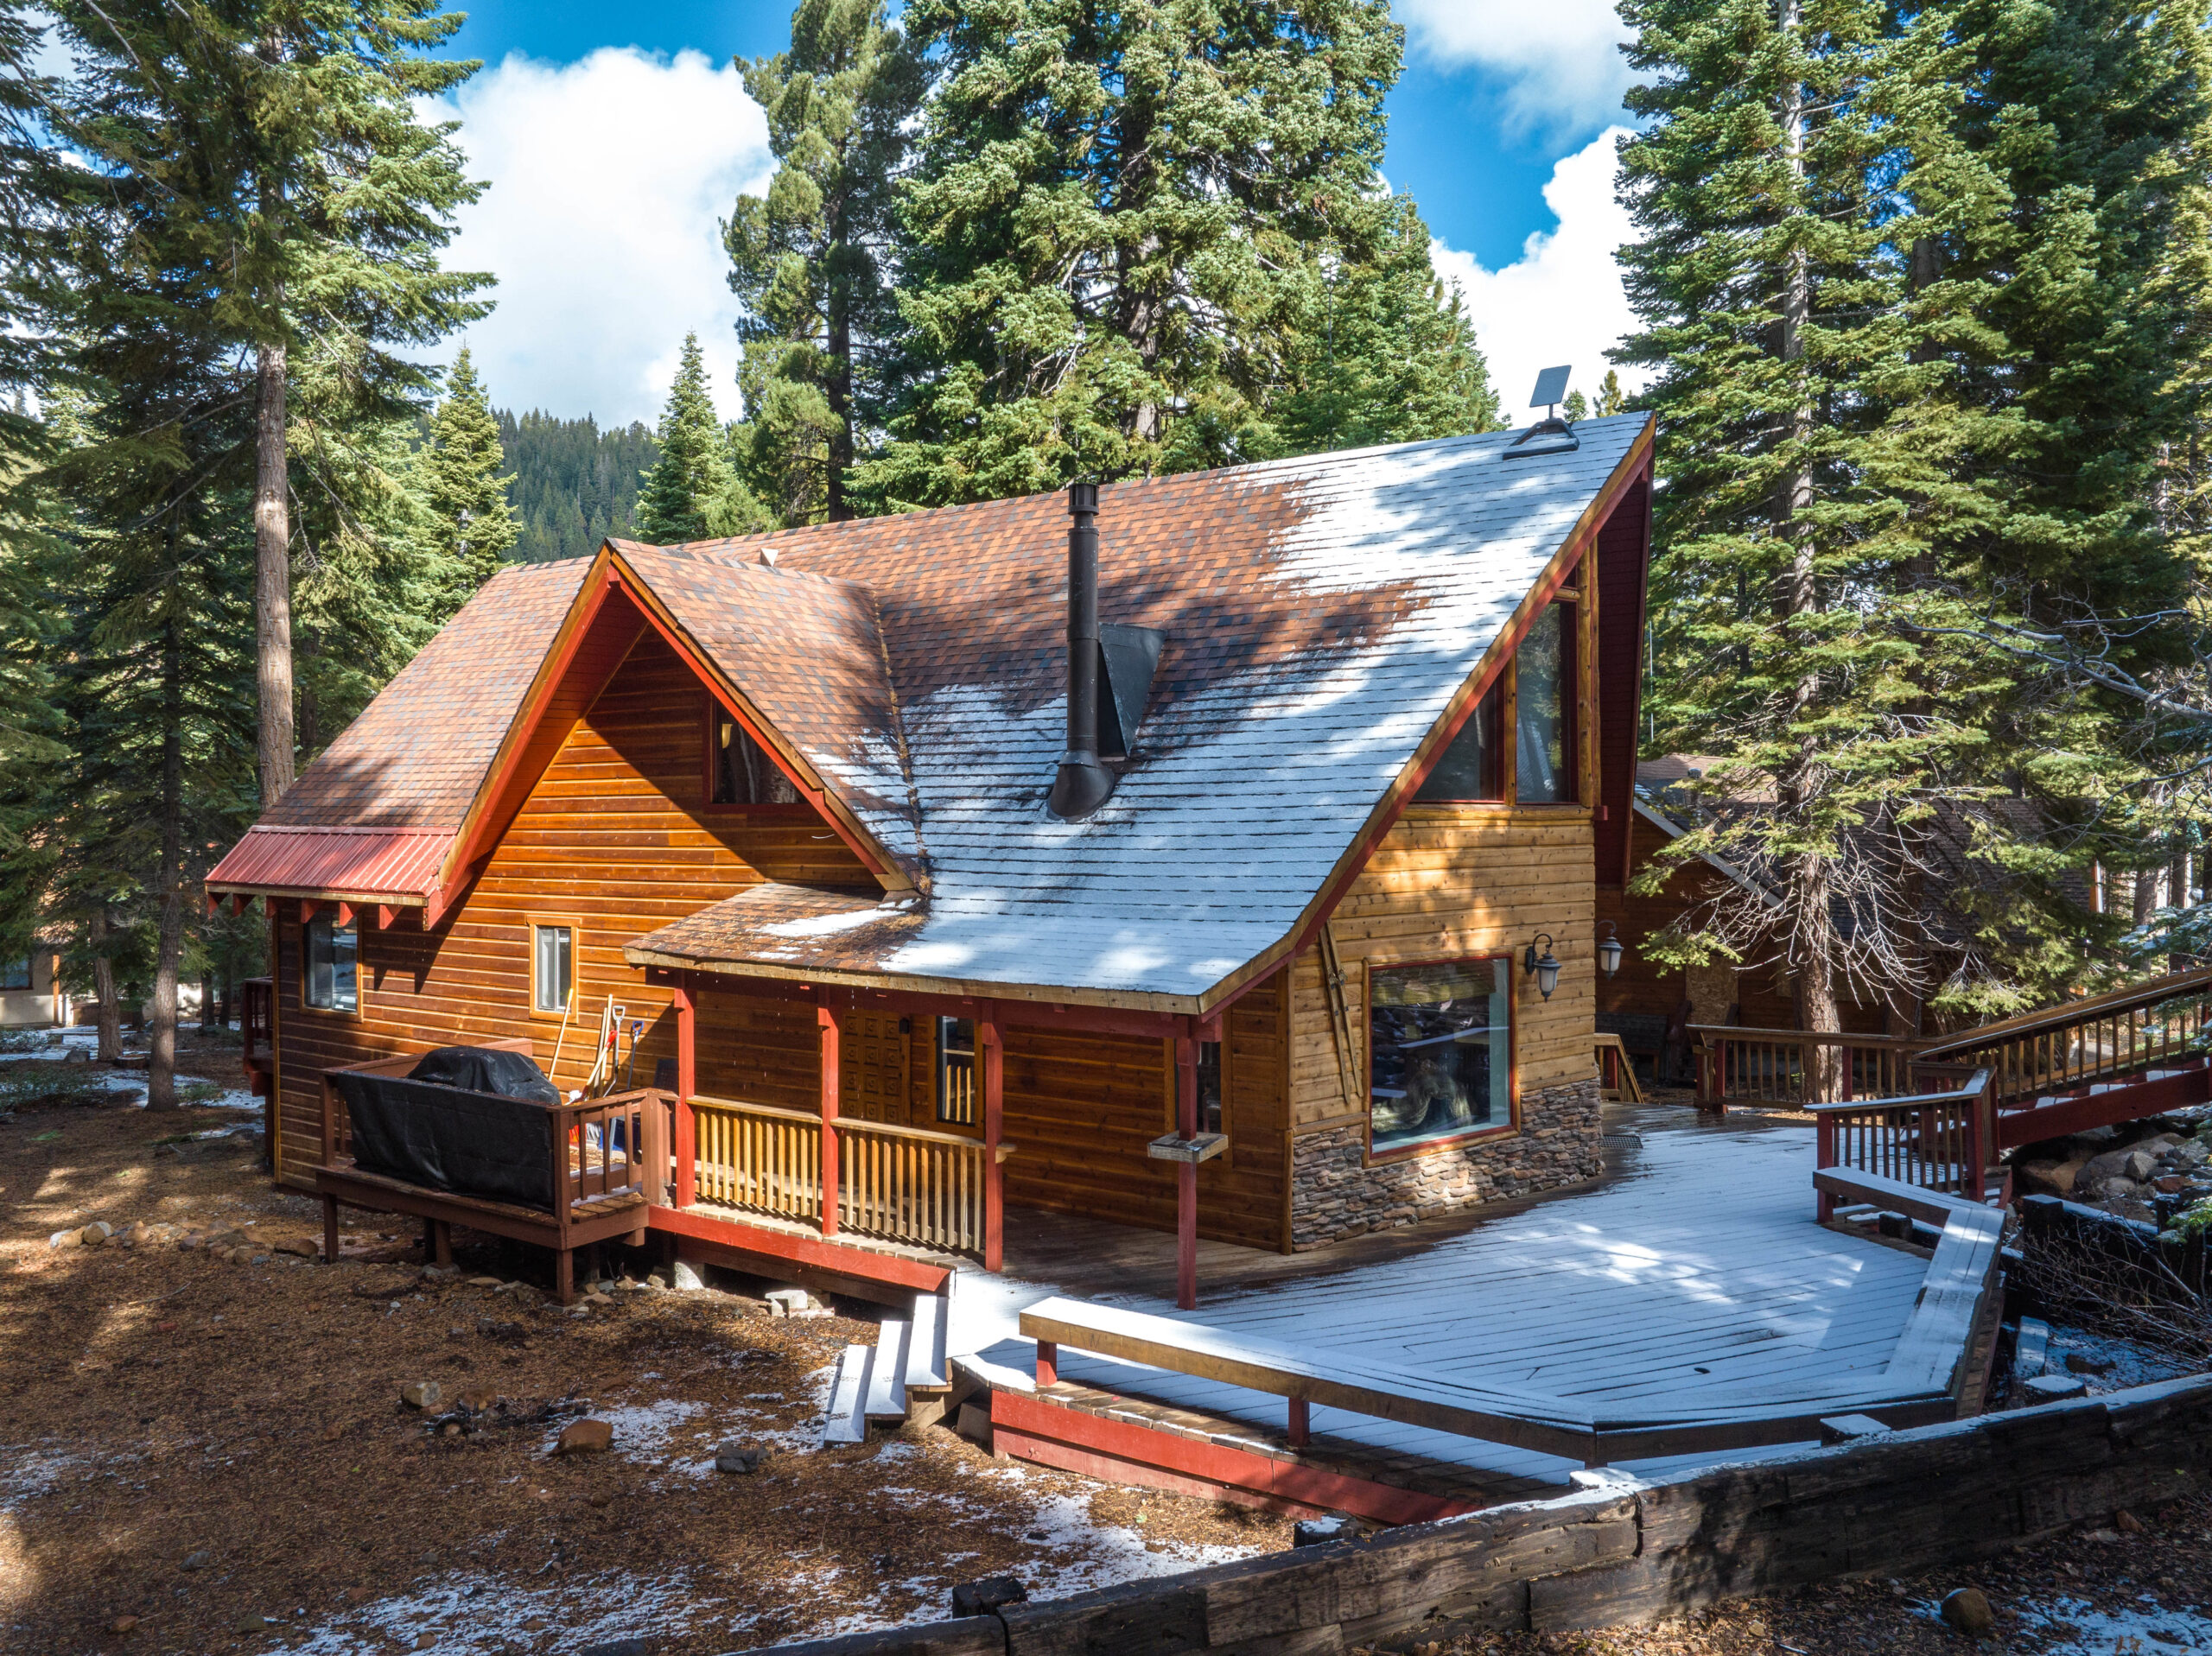 Snowy-Vista-Cabin-Newly-Remodel-arial-view